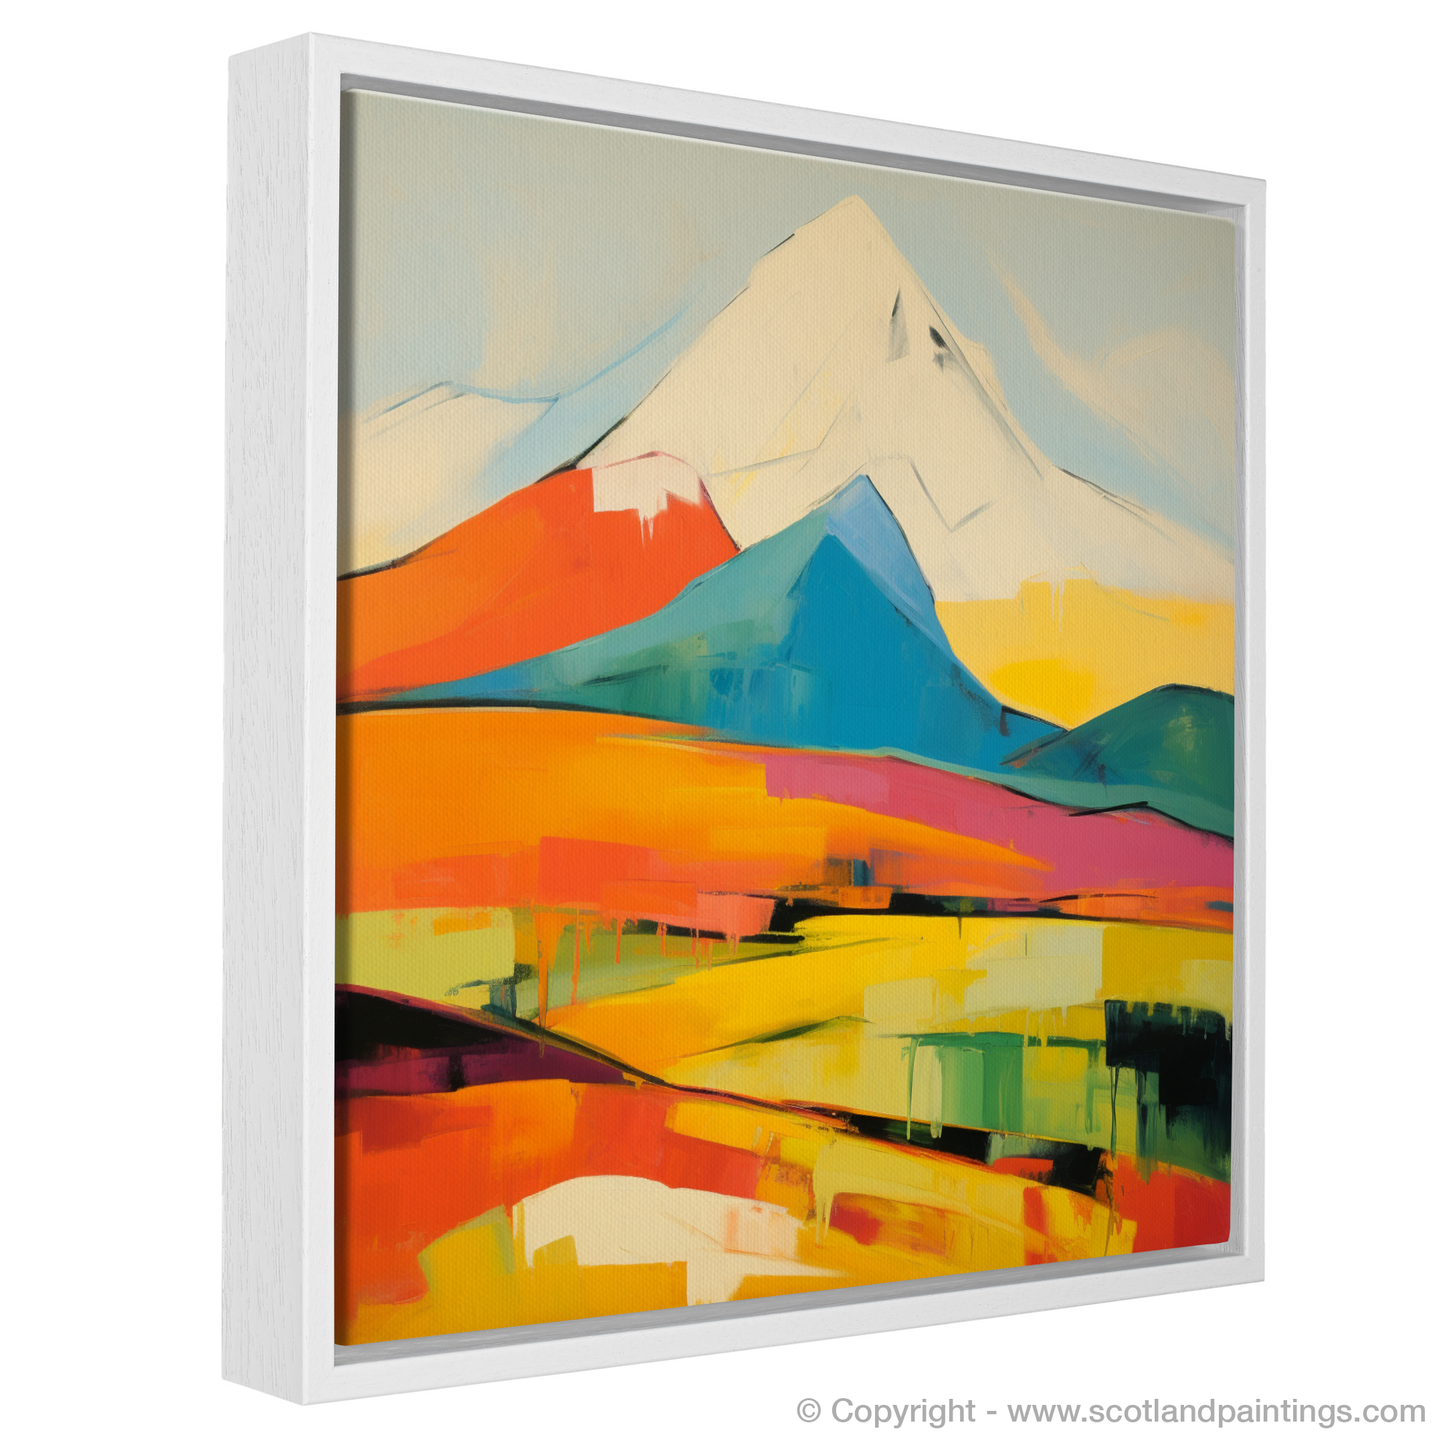 Painting and Art Print of Meall Garbh (Càrn Mairg) entitled "Abstract Essence of Meall Garbh".